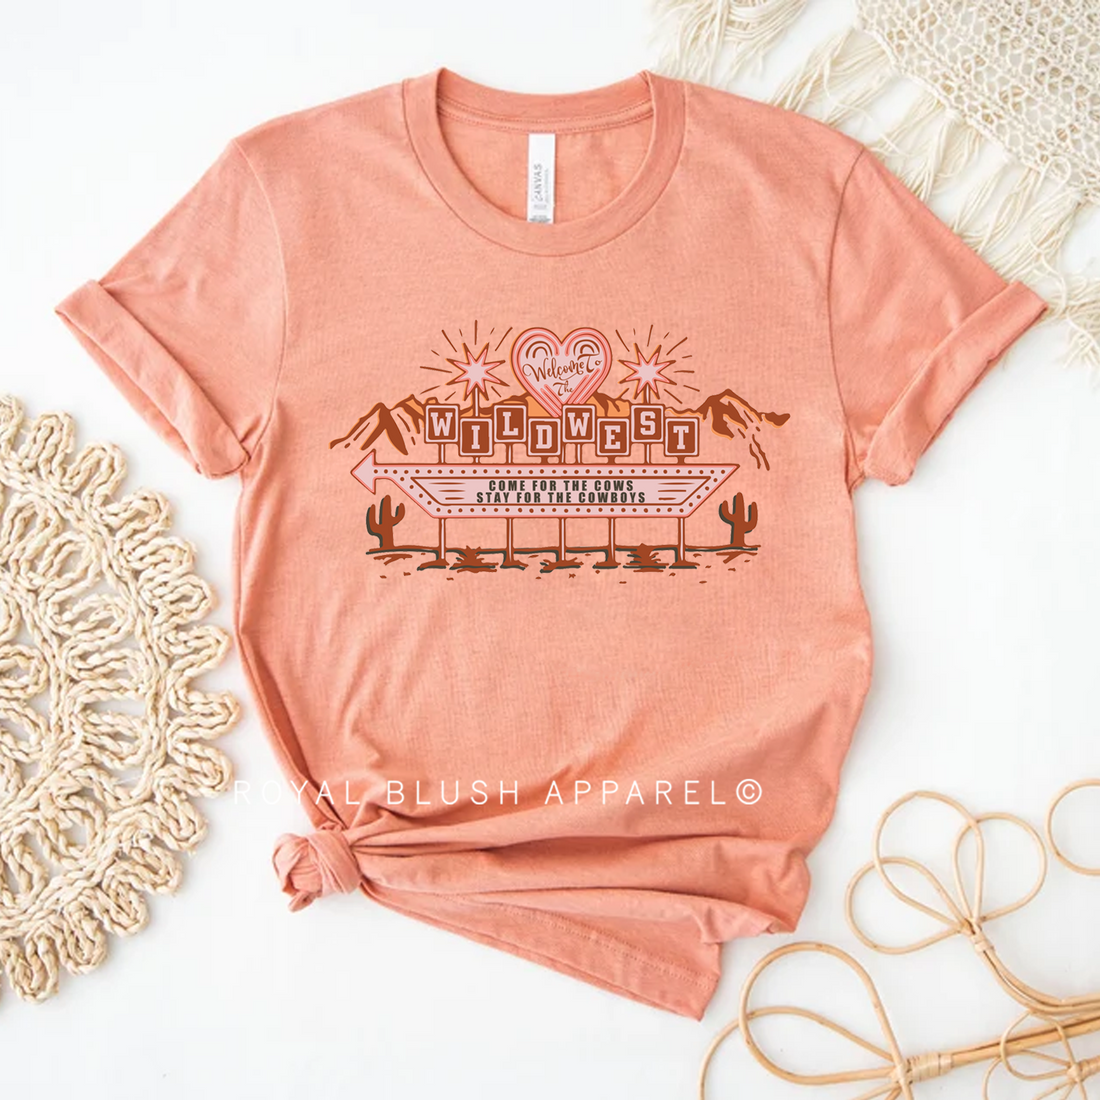 Welcome To The Wildwest Relaxed Unisex T-shirt